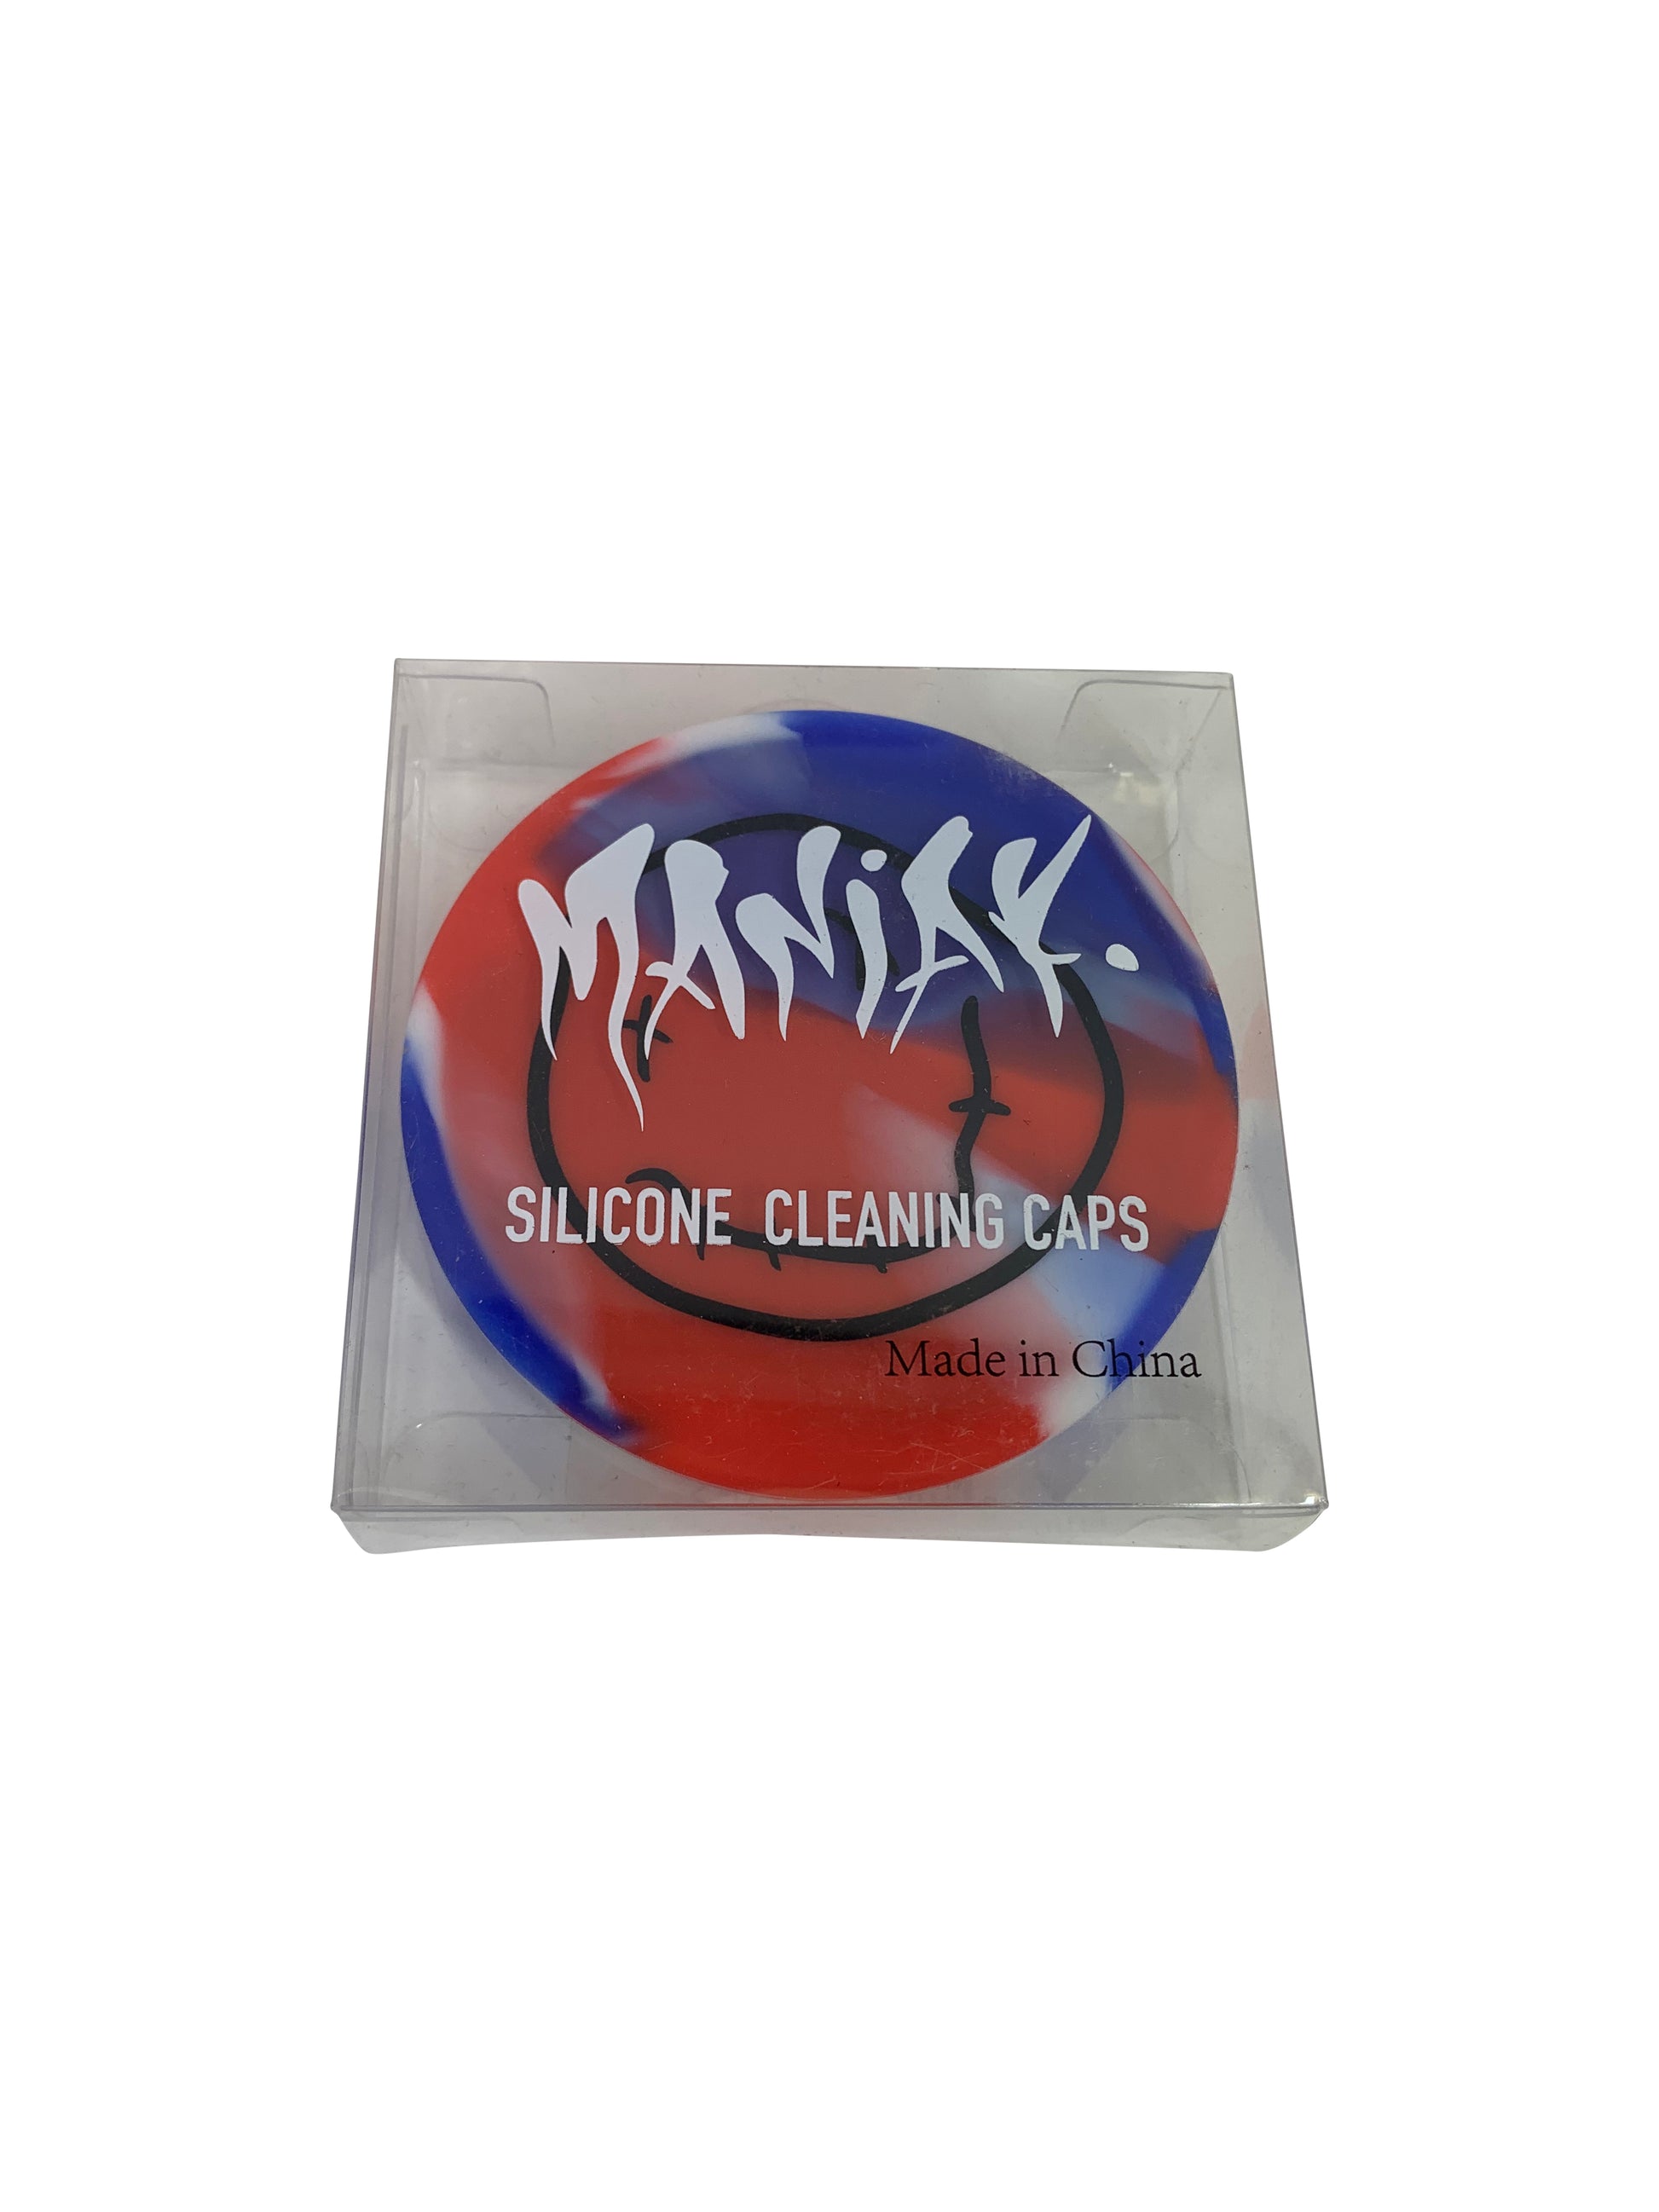 Maniak Silicone Cleaning Caps